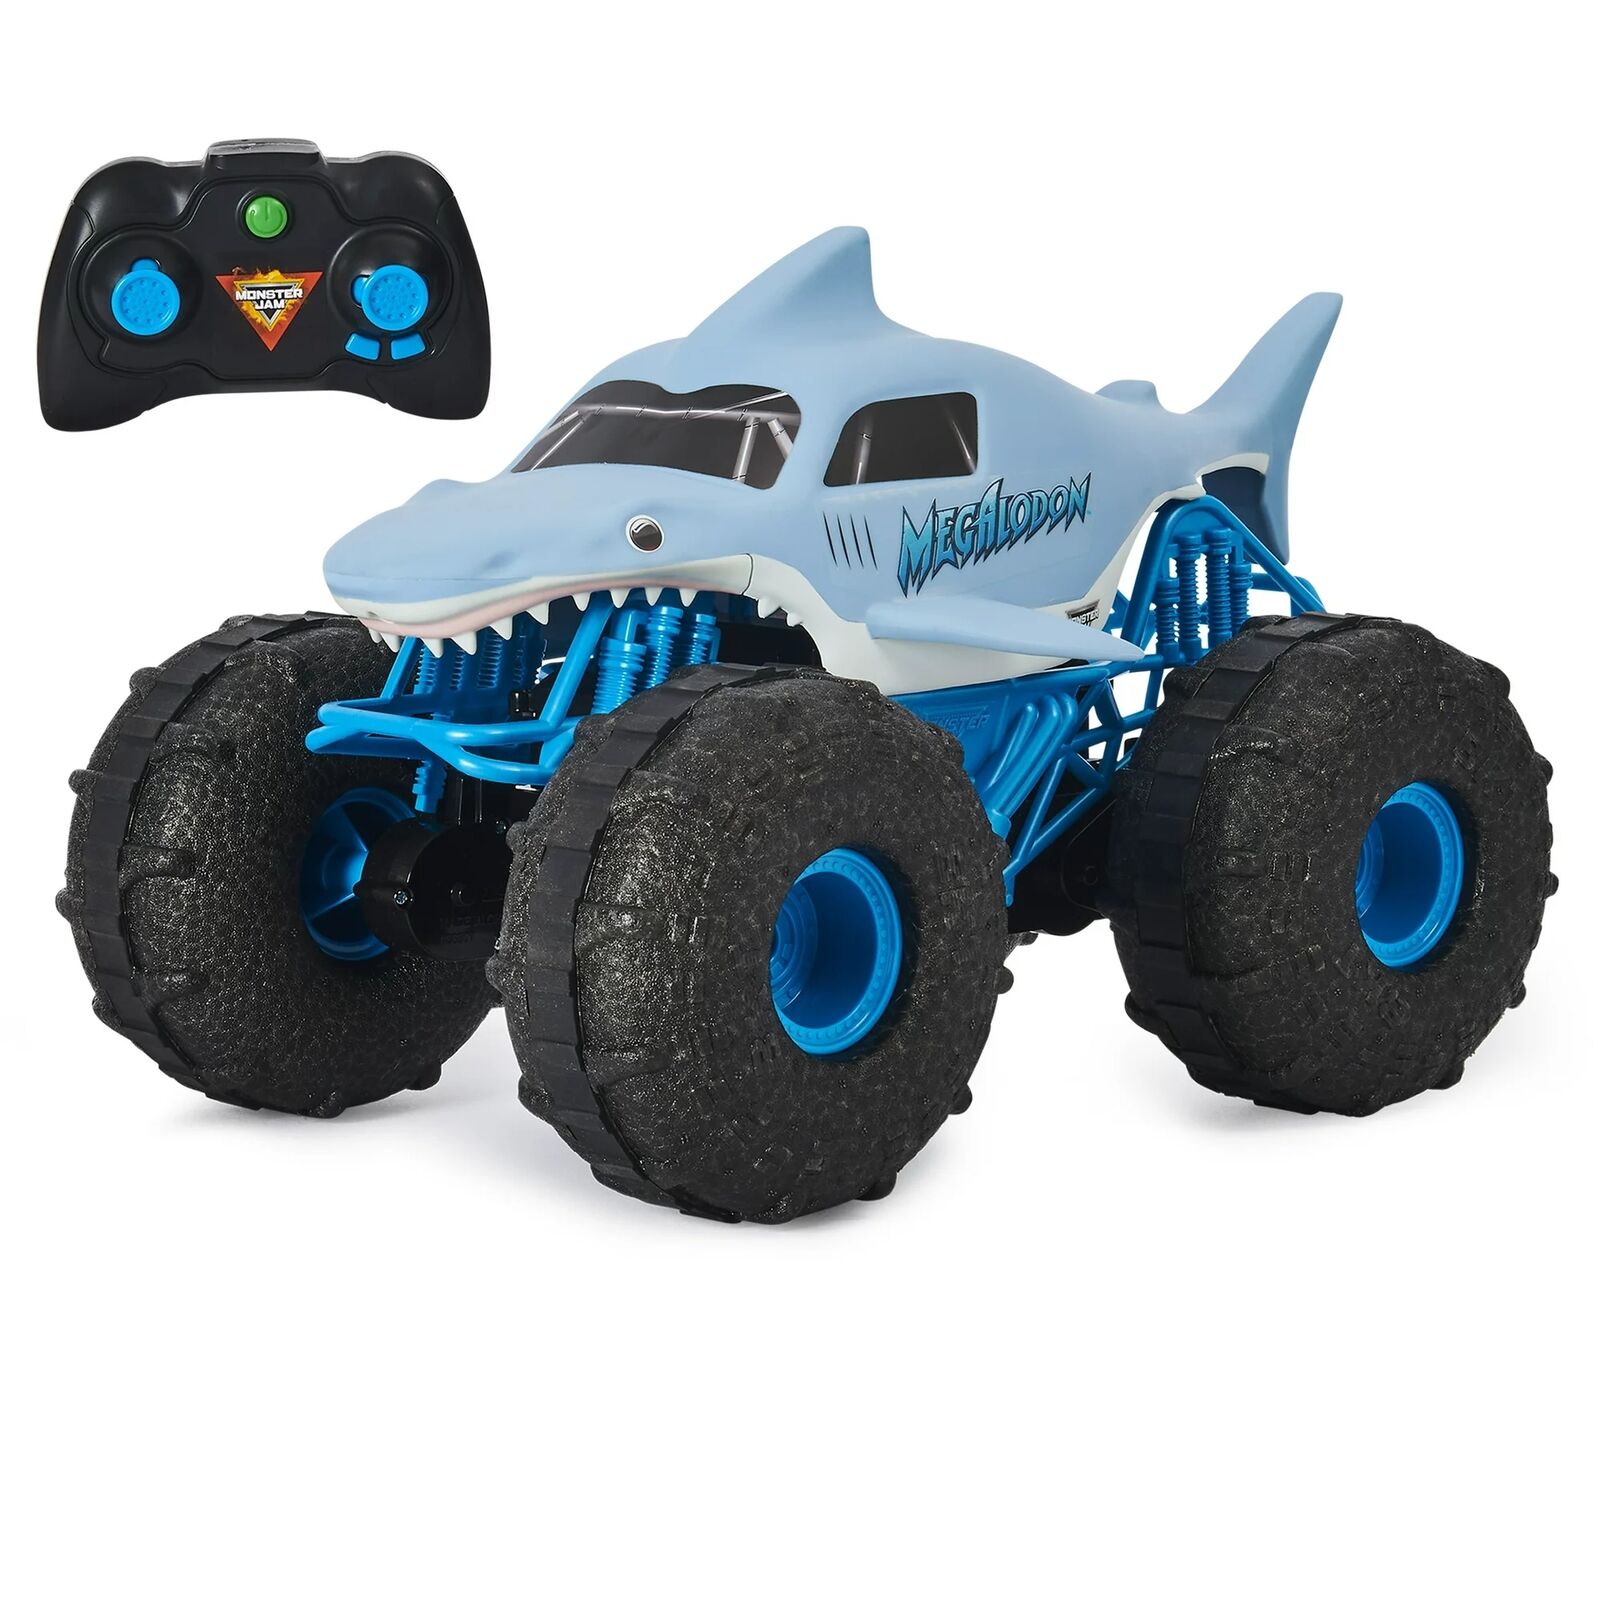 1:15 Scale Megalodon Storm All-Terrain Remote Control Monster Truck Toy Vehicle